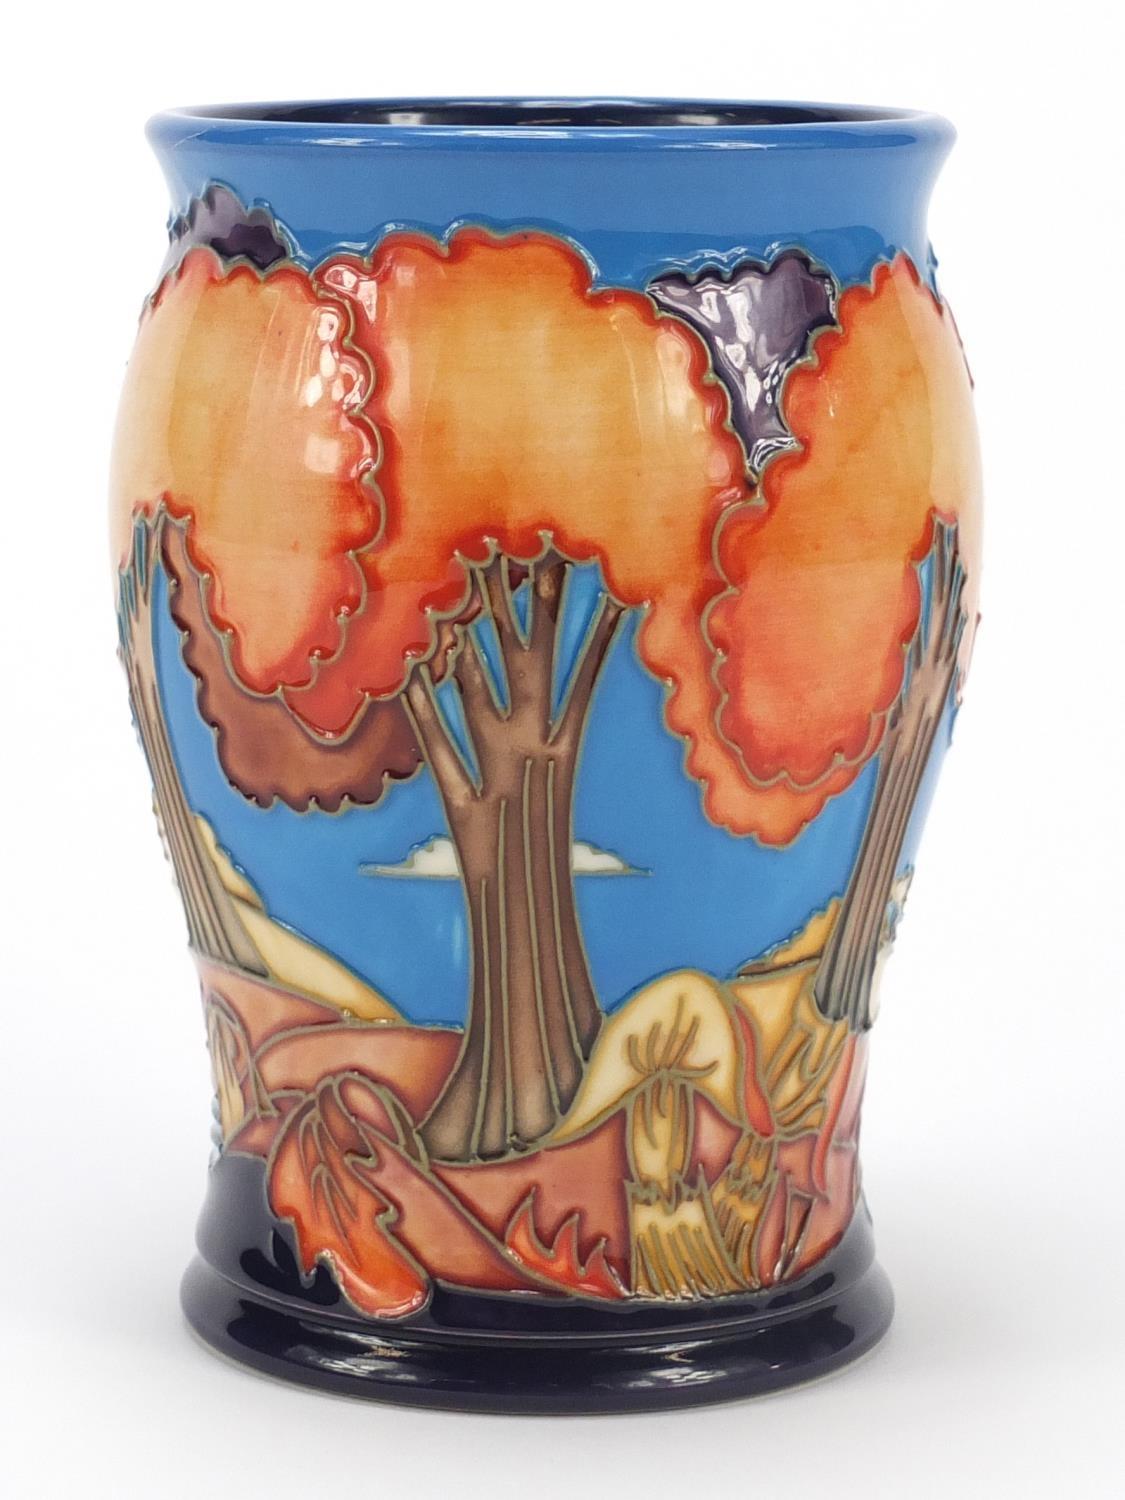 Emma Bossons for Moorcroft, pottery vase hand painted in the Wanderer's Sky pattern, dated 2002, - Image 3 of 9